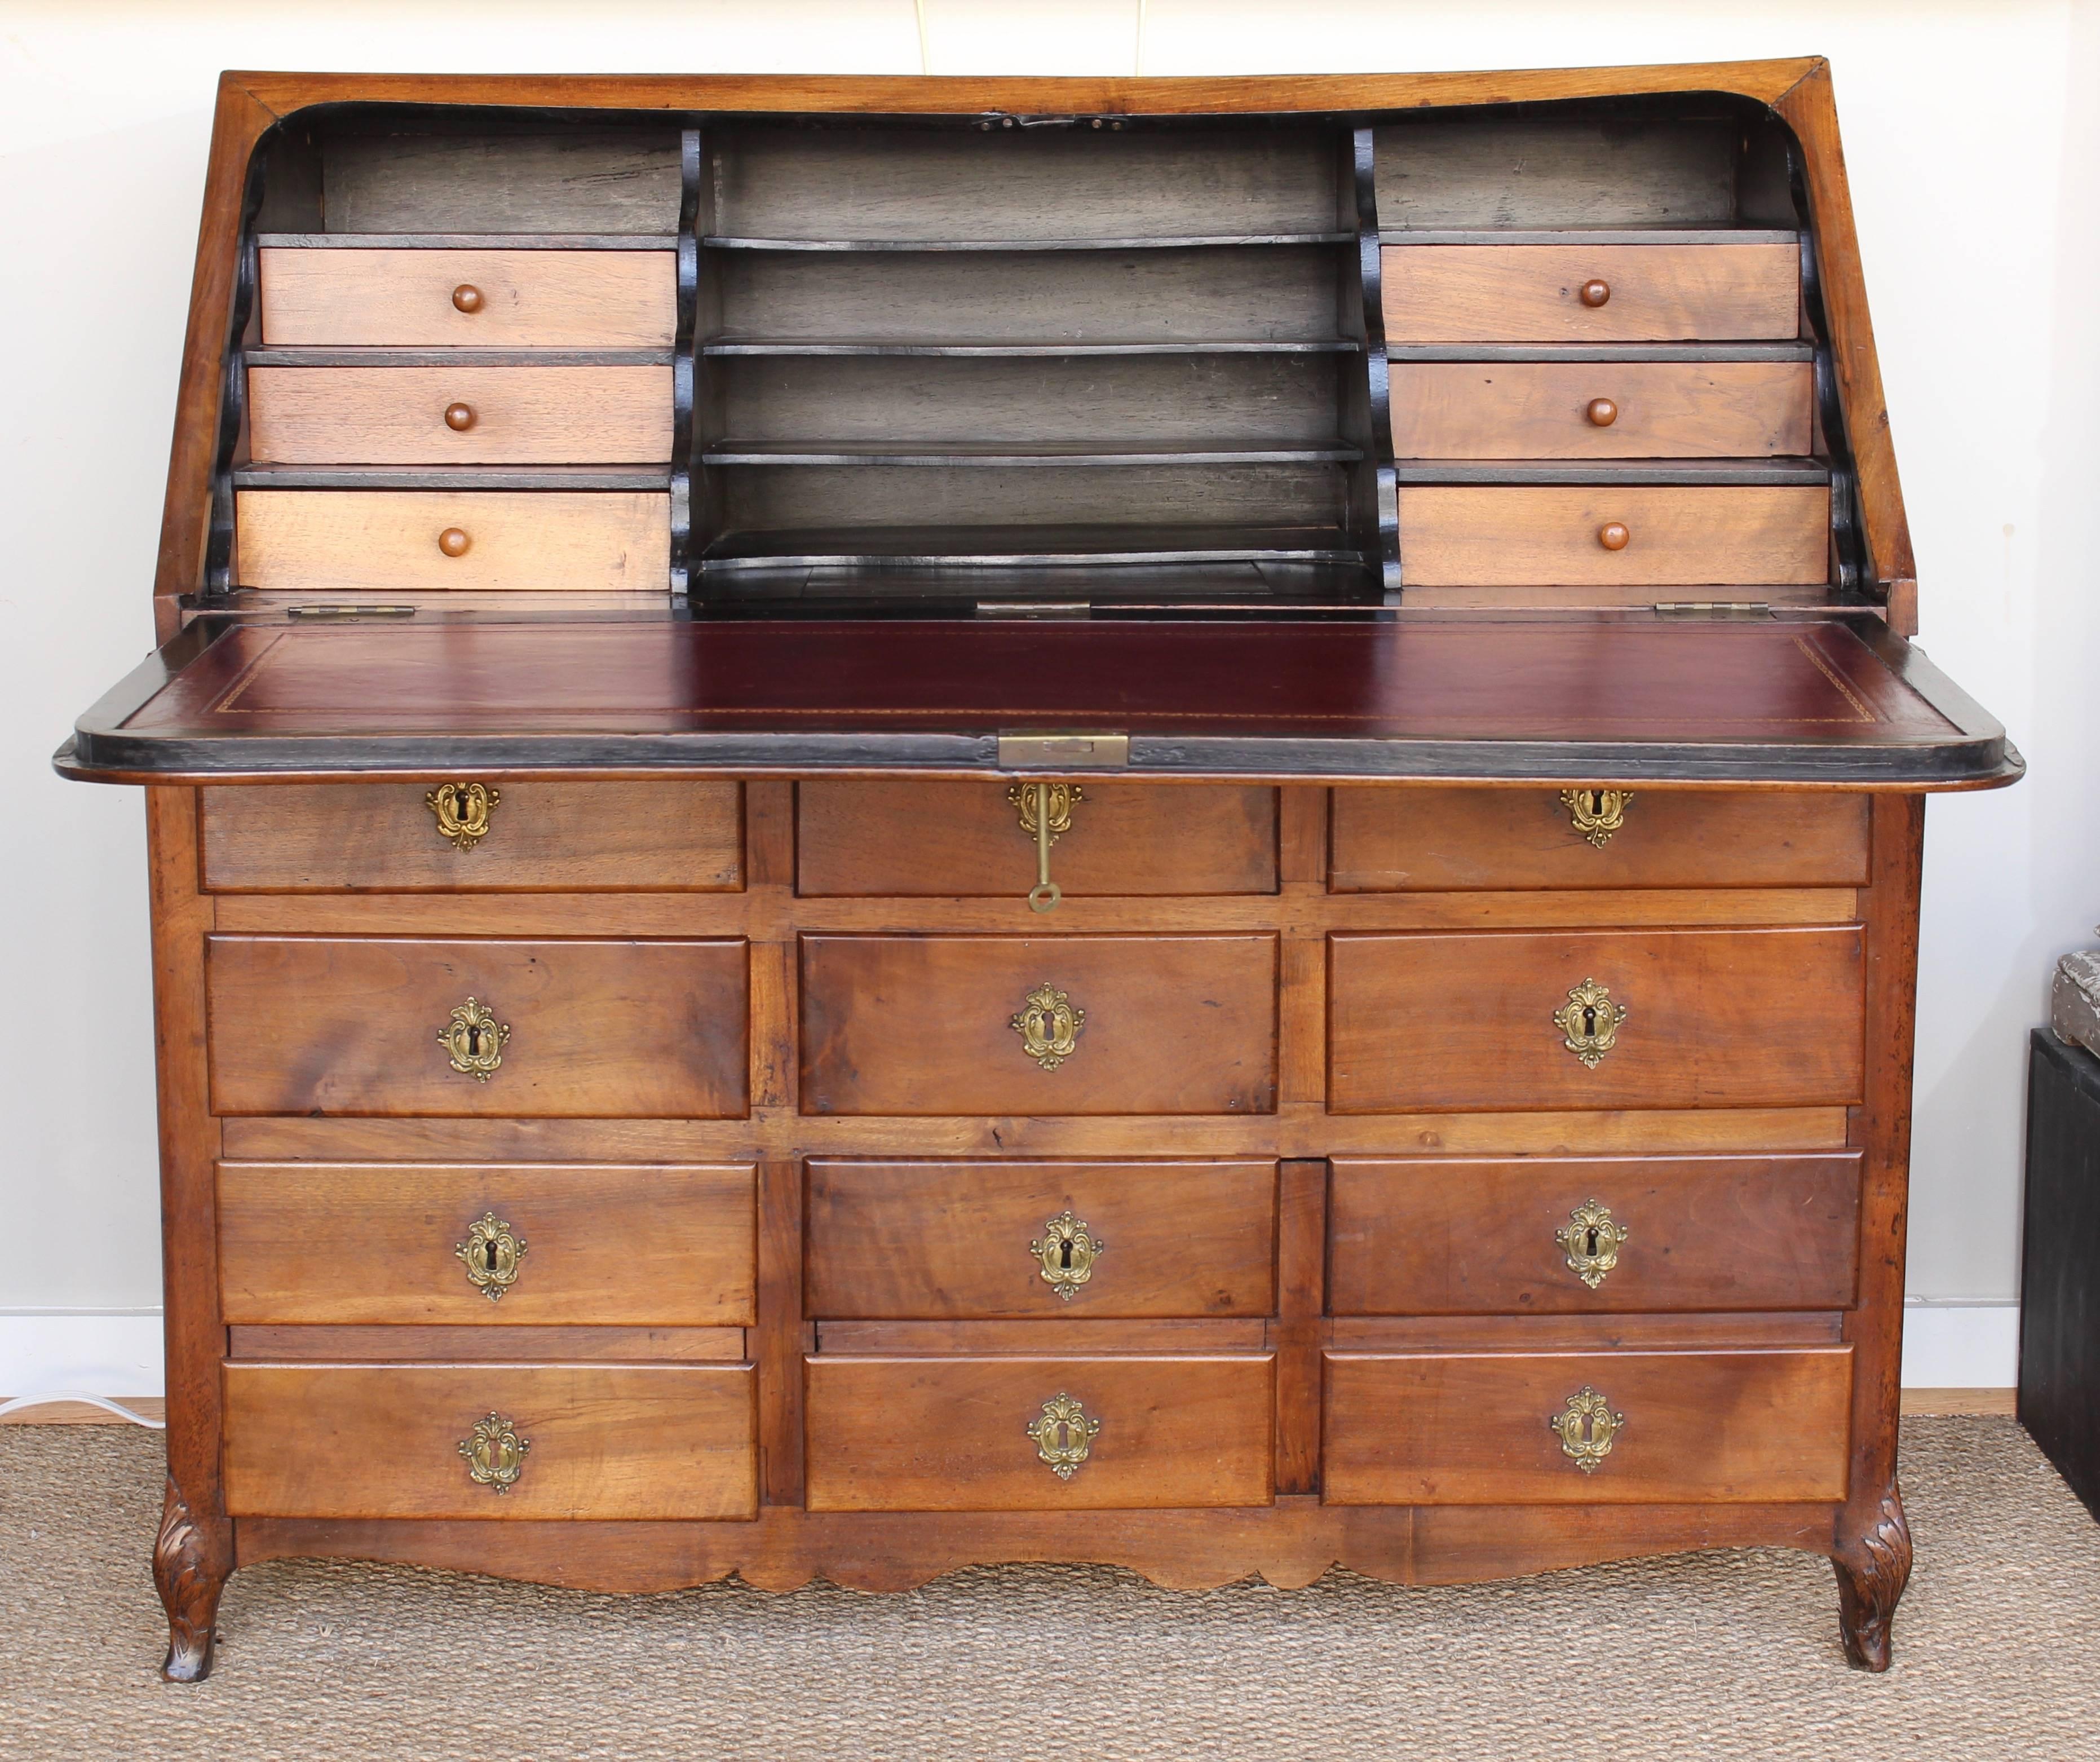 An exceptional late 18th century French Provincial fruitwood drop front desk with twelve visible drawers and a multitude of shelves, drawers and secret compartments behind the drop front with red tooled leather writing surface.